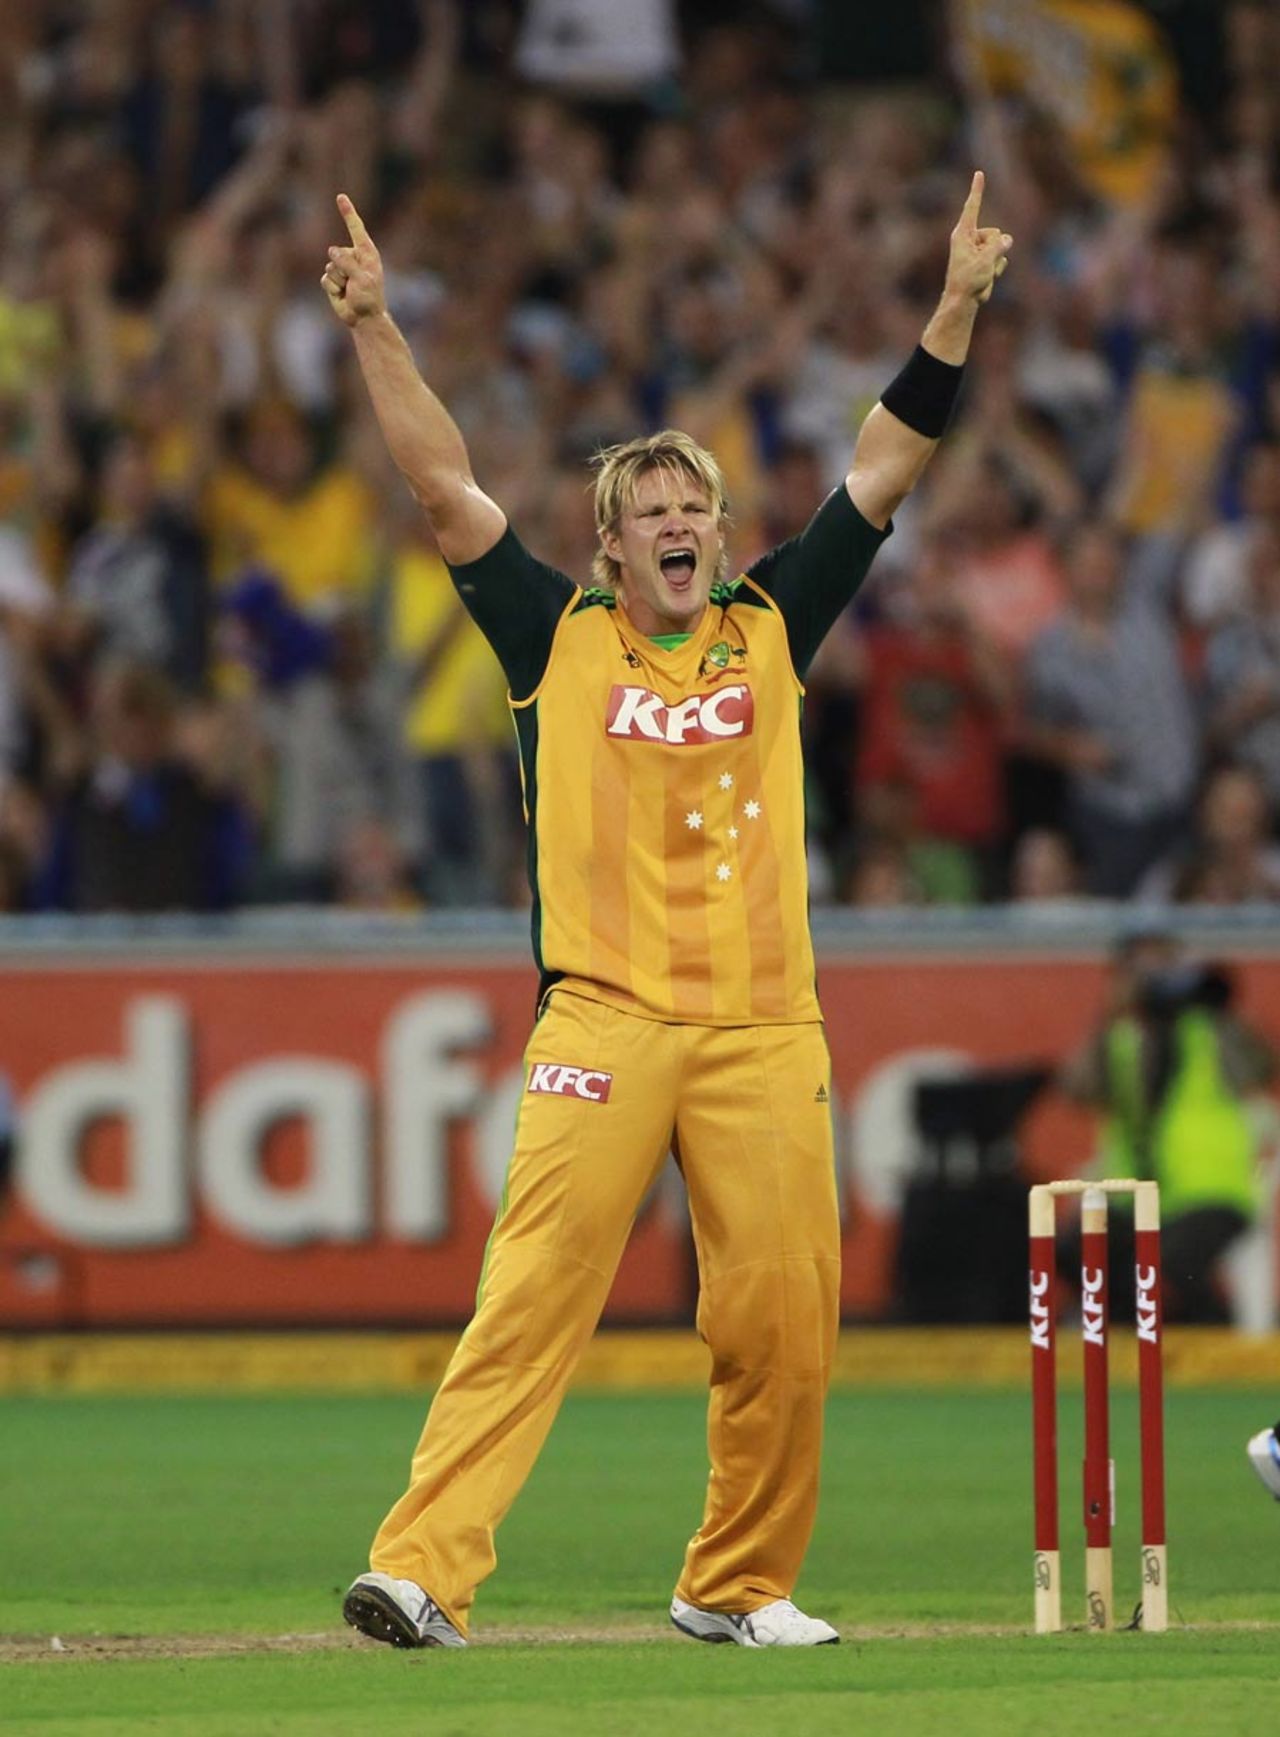 Shane Watson claimed 2 for 17 in his four overs, Australia v England, 2nd Twenty20, Melbourne, January 14, 2011